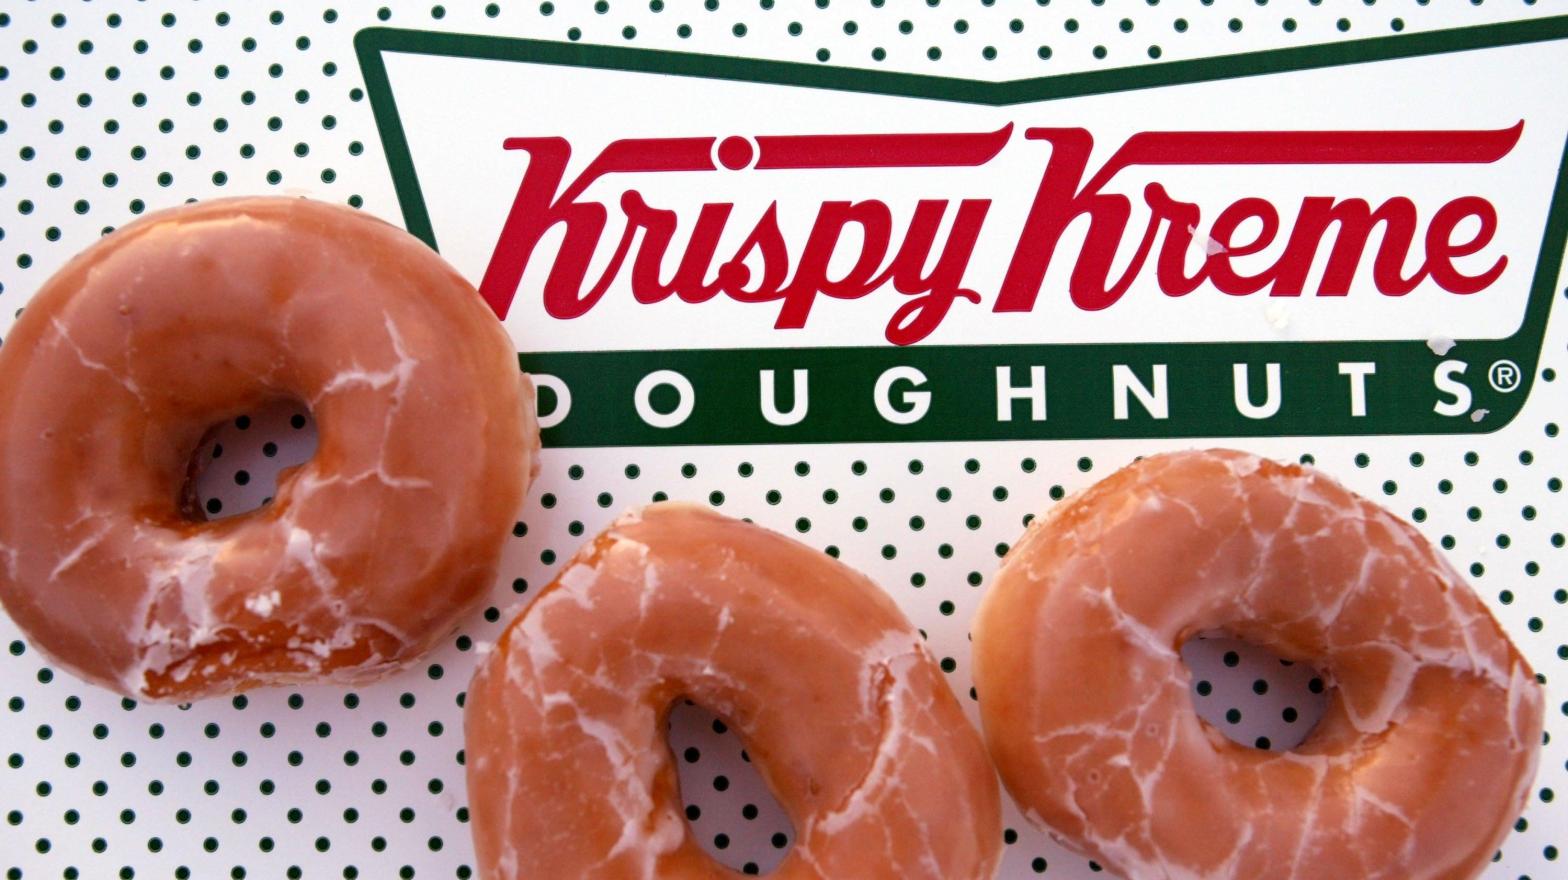 Krispy Kreme is reportedly testing out automation that could add filling to doughnuts, remove those filled doughnuts from the production line, and place them into a box (Image: Joe Raedle, Getty Images)